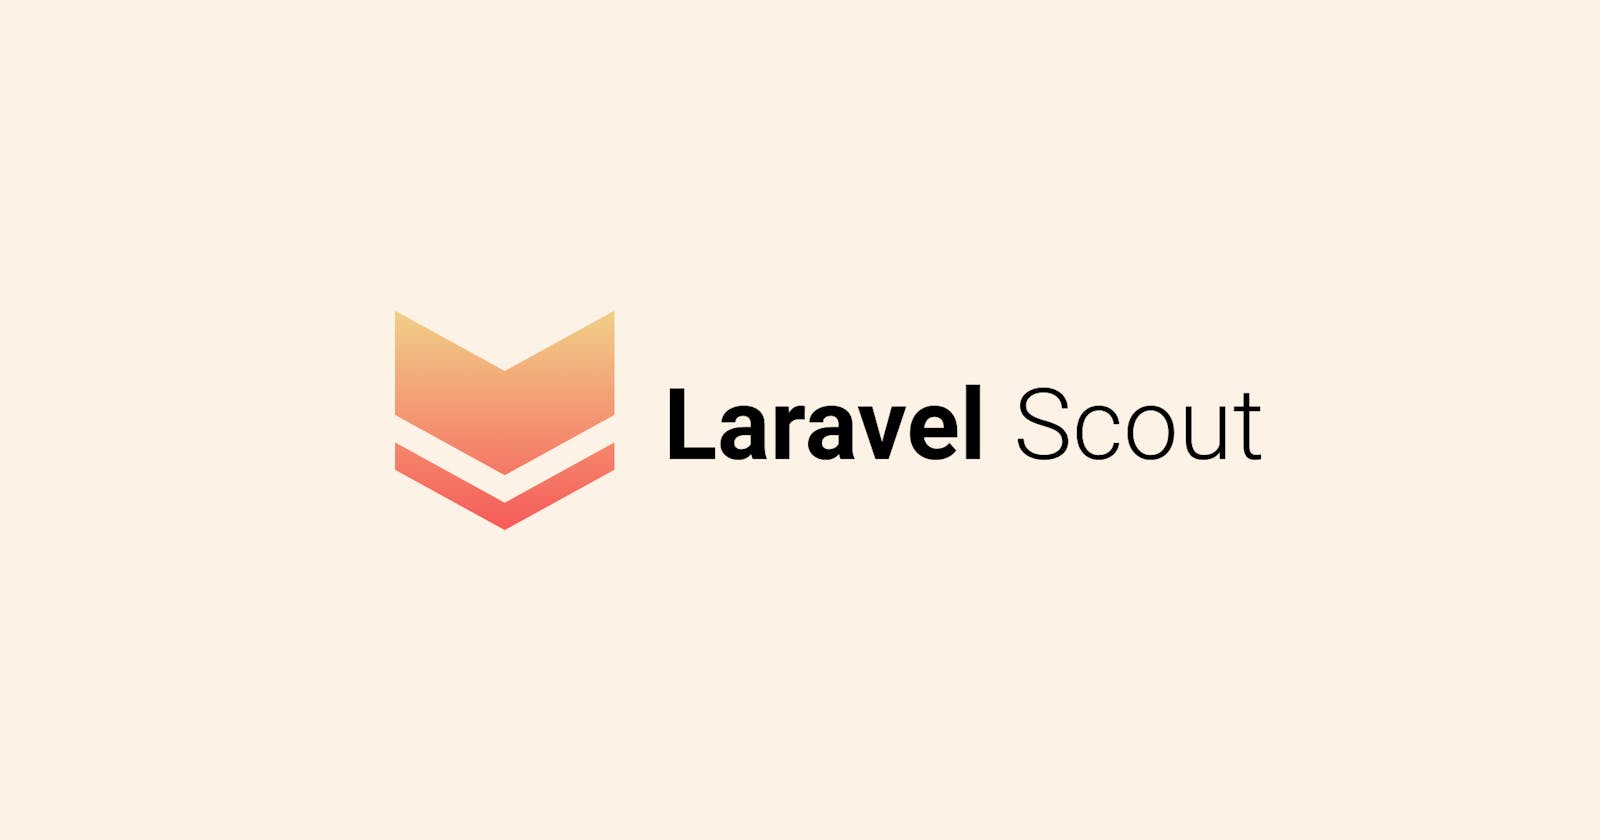 A practical guide to search Eloquent relationships using Laravel Scout Database Driver